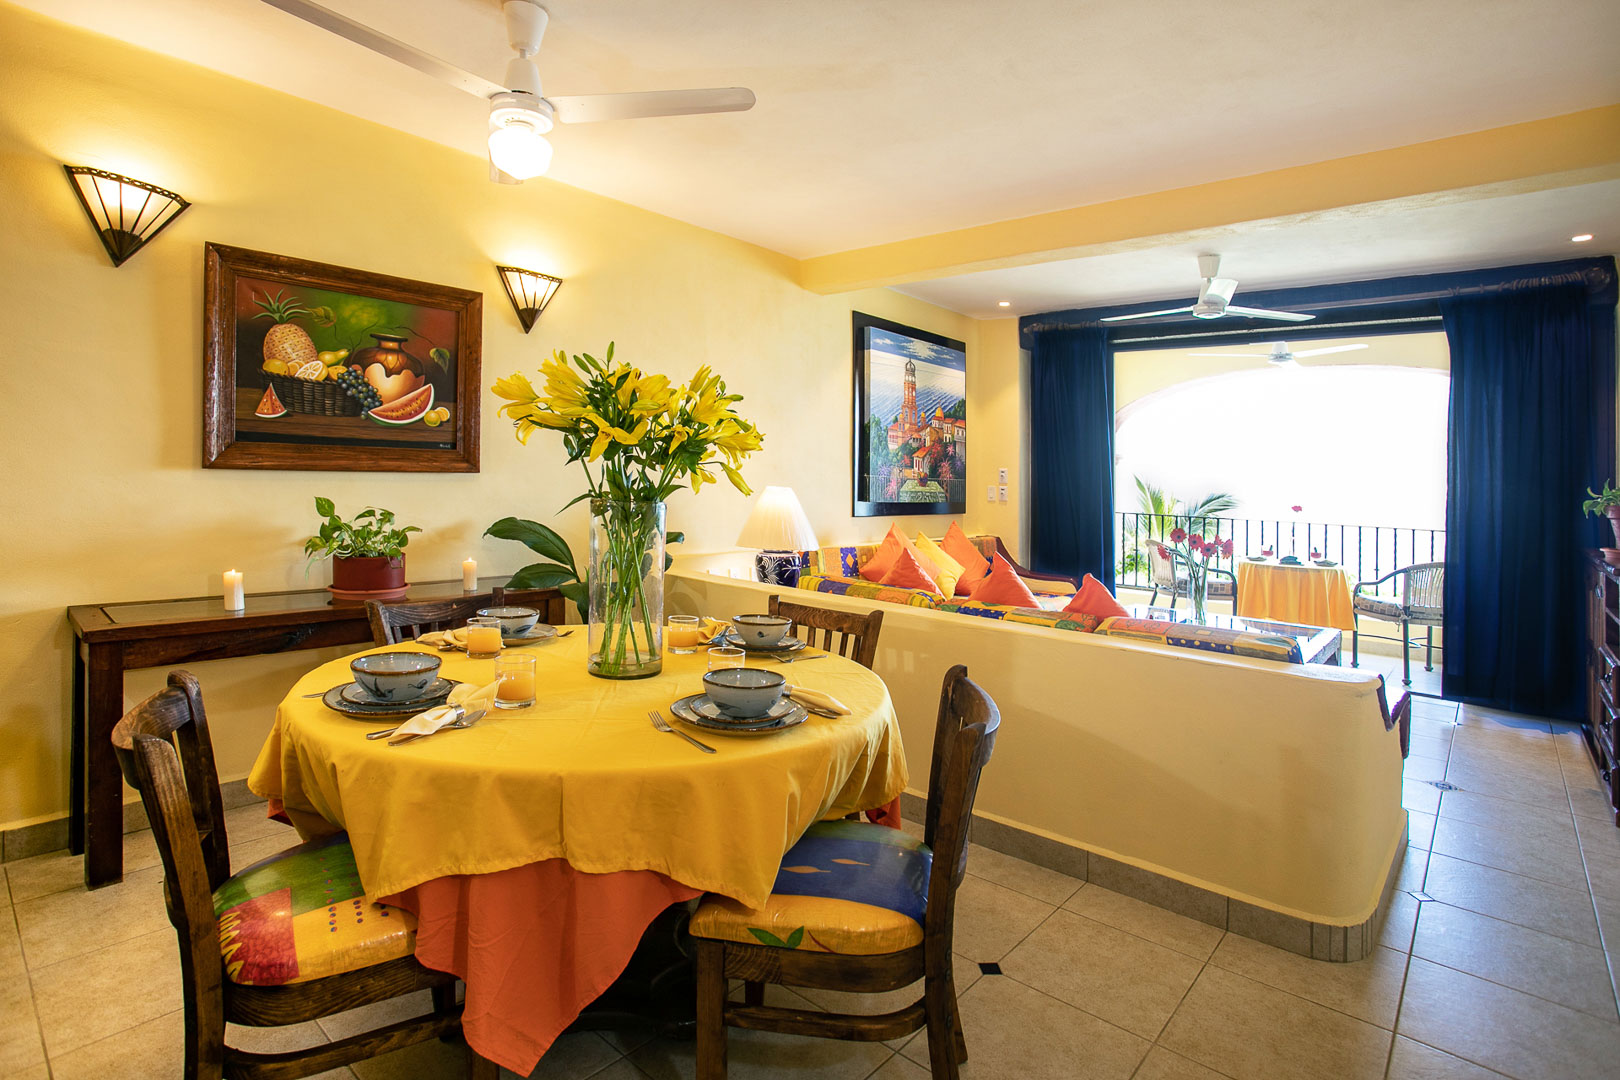 A colorful dining table and living room that faces the ocean view at TPI's Lindo Mar Resort in Puerto Vallarta, Mexico.